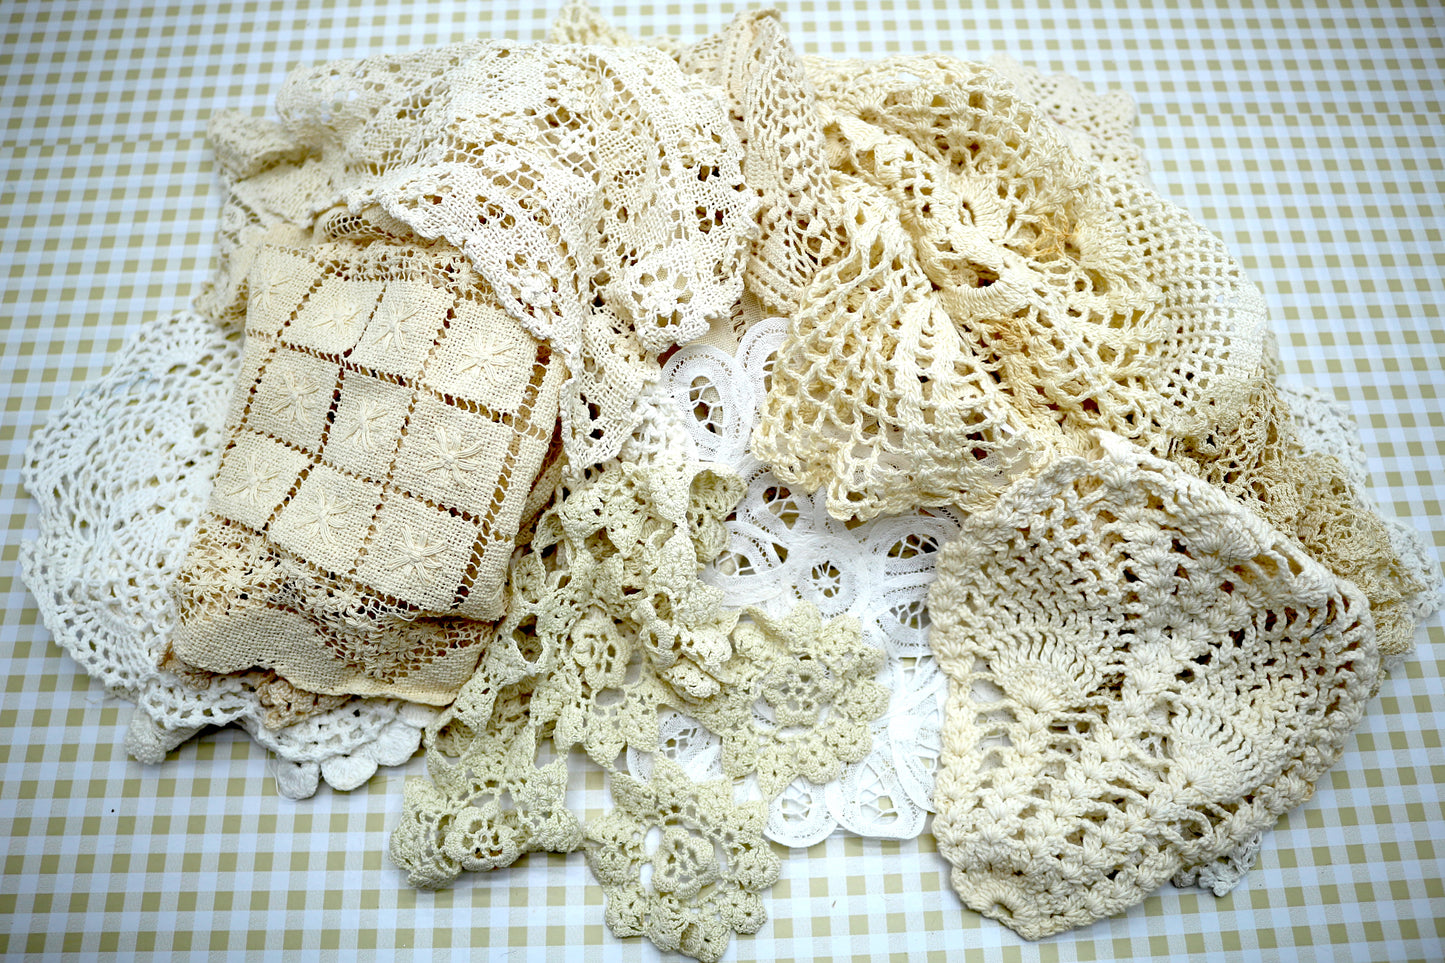 1/2 Pound Variety Mix of Cloth Doilies, Plant Accessories, Office Decorations